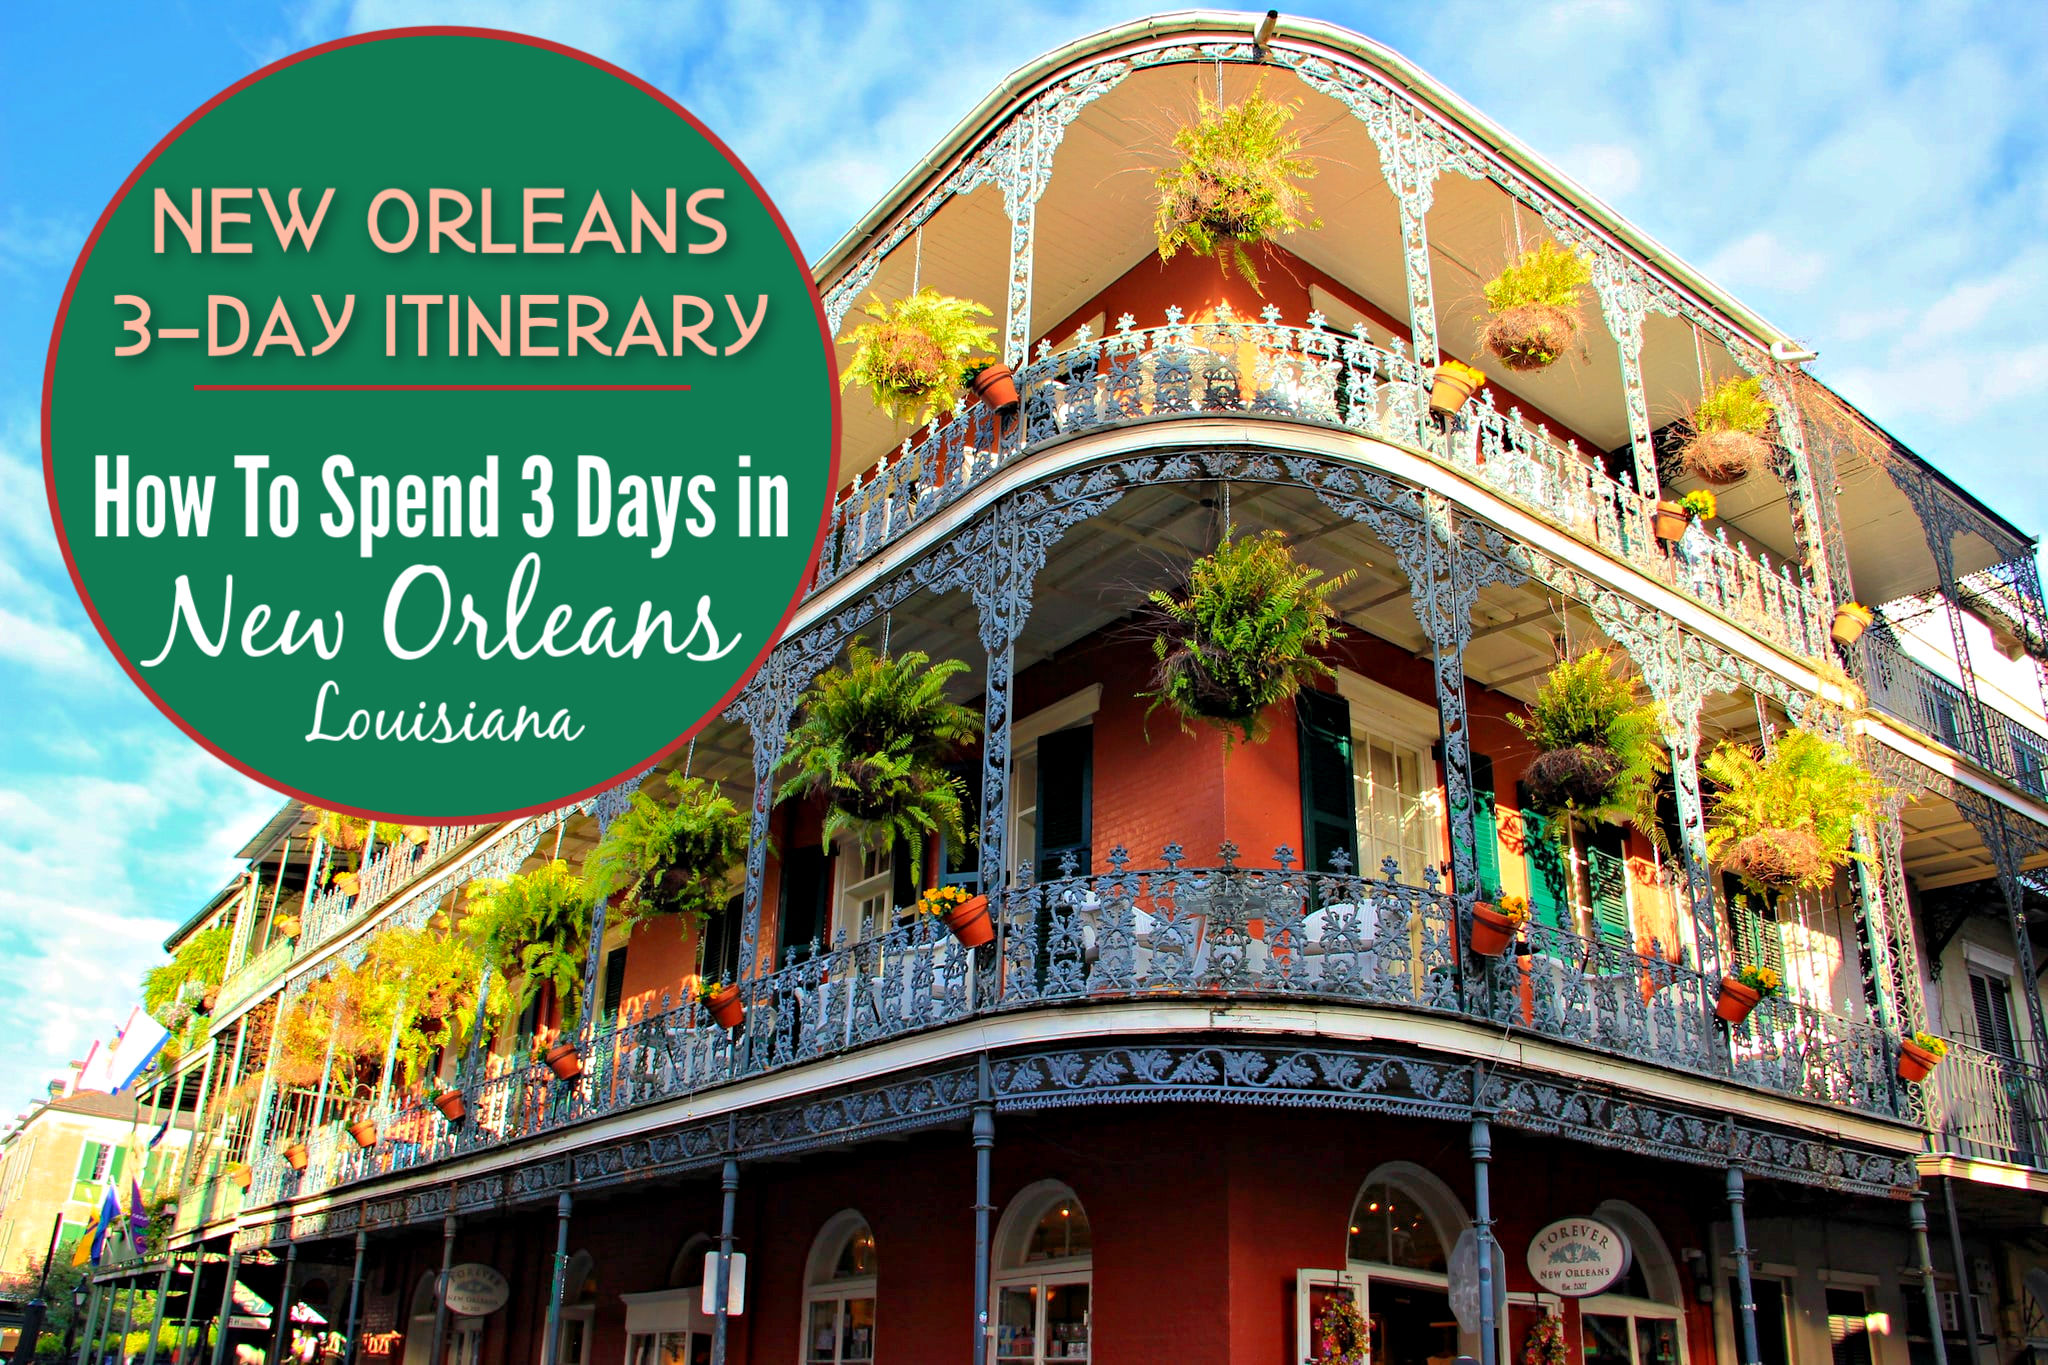 New Orleans Itinerary: How To Spend 3 Days in New Orleans, Louisiana - Jetsetting Fools